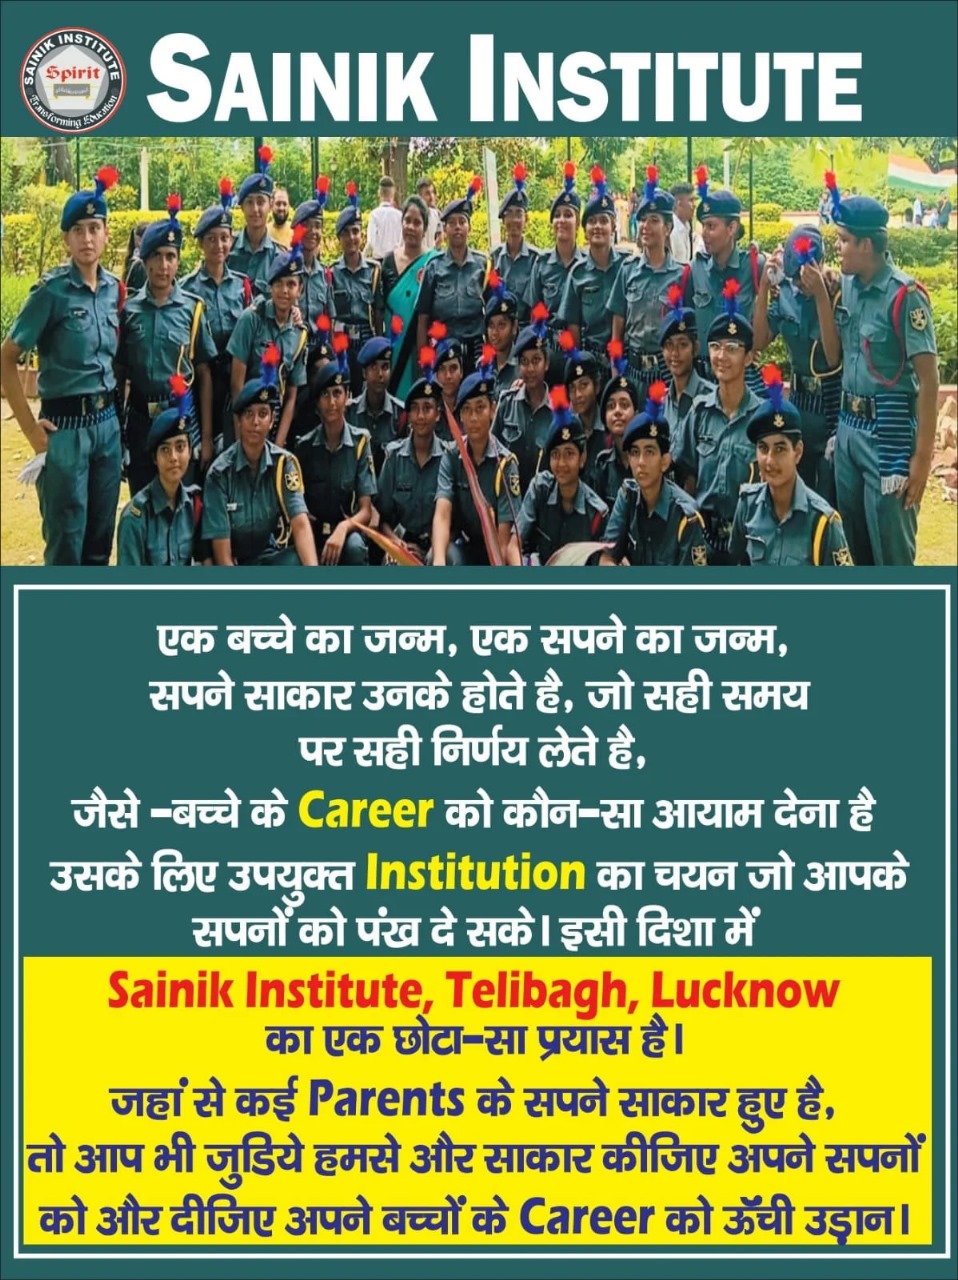 Sainik Institute Lucknow is prestigious institute of India which prepare students for a career in the armed forces. Sainik School in Lucknow offer specialized training to help students clear the entrance exams for admission to these schools. Sainik School in Lucknow provide comprehensive guidance on subjects like mathematics, English, general knowledge, and current affairs, which are essential for the entrance exams. Additionally, they conduct mock tests and practice sessions to familiarize students with the exam pattern and help them improve their time management skills.